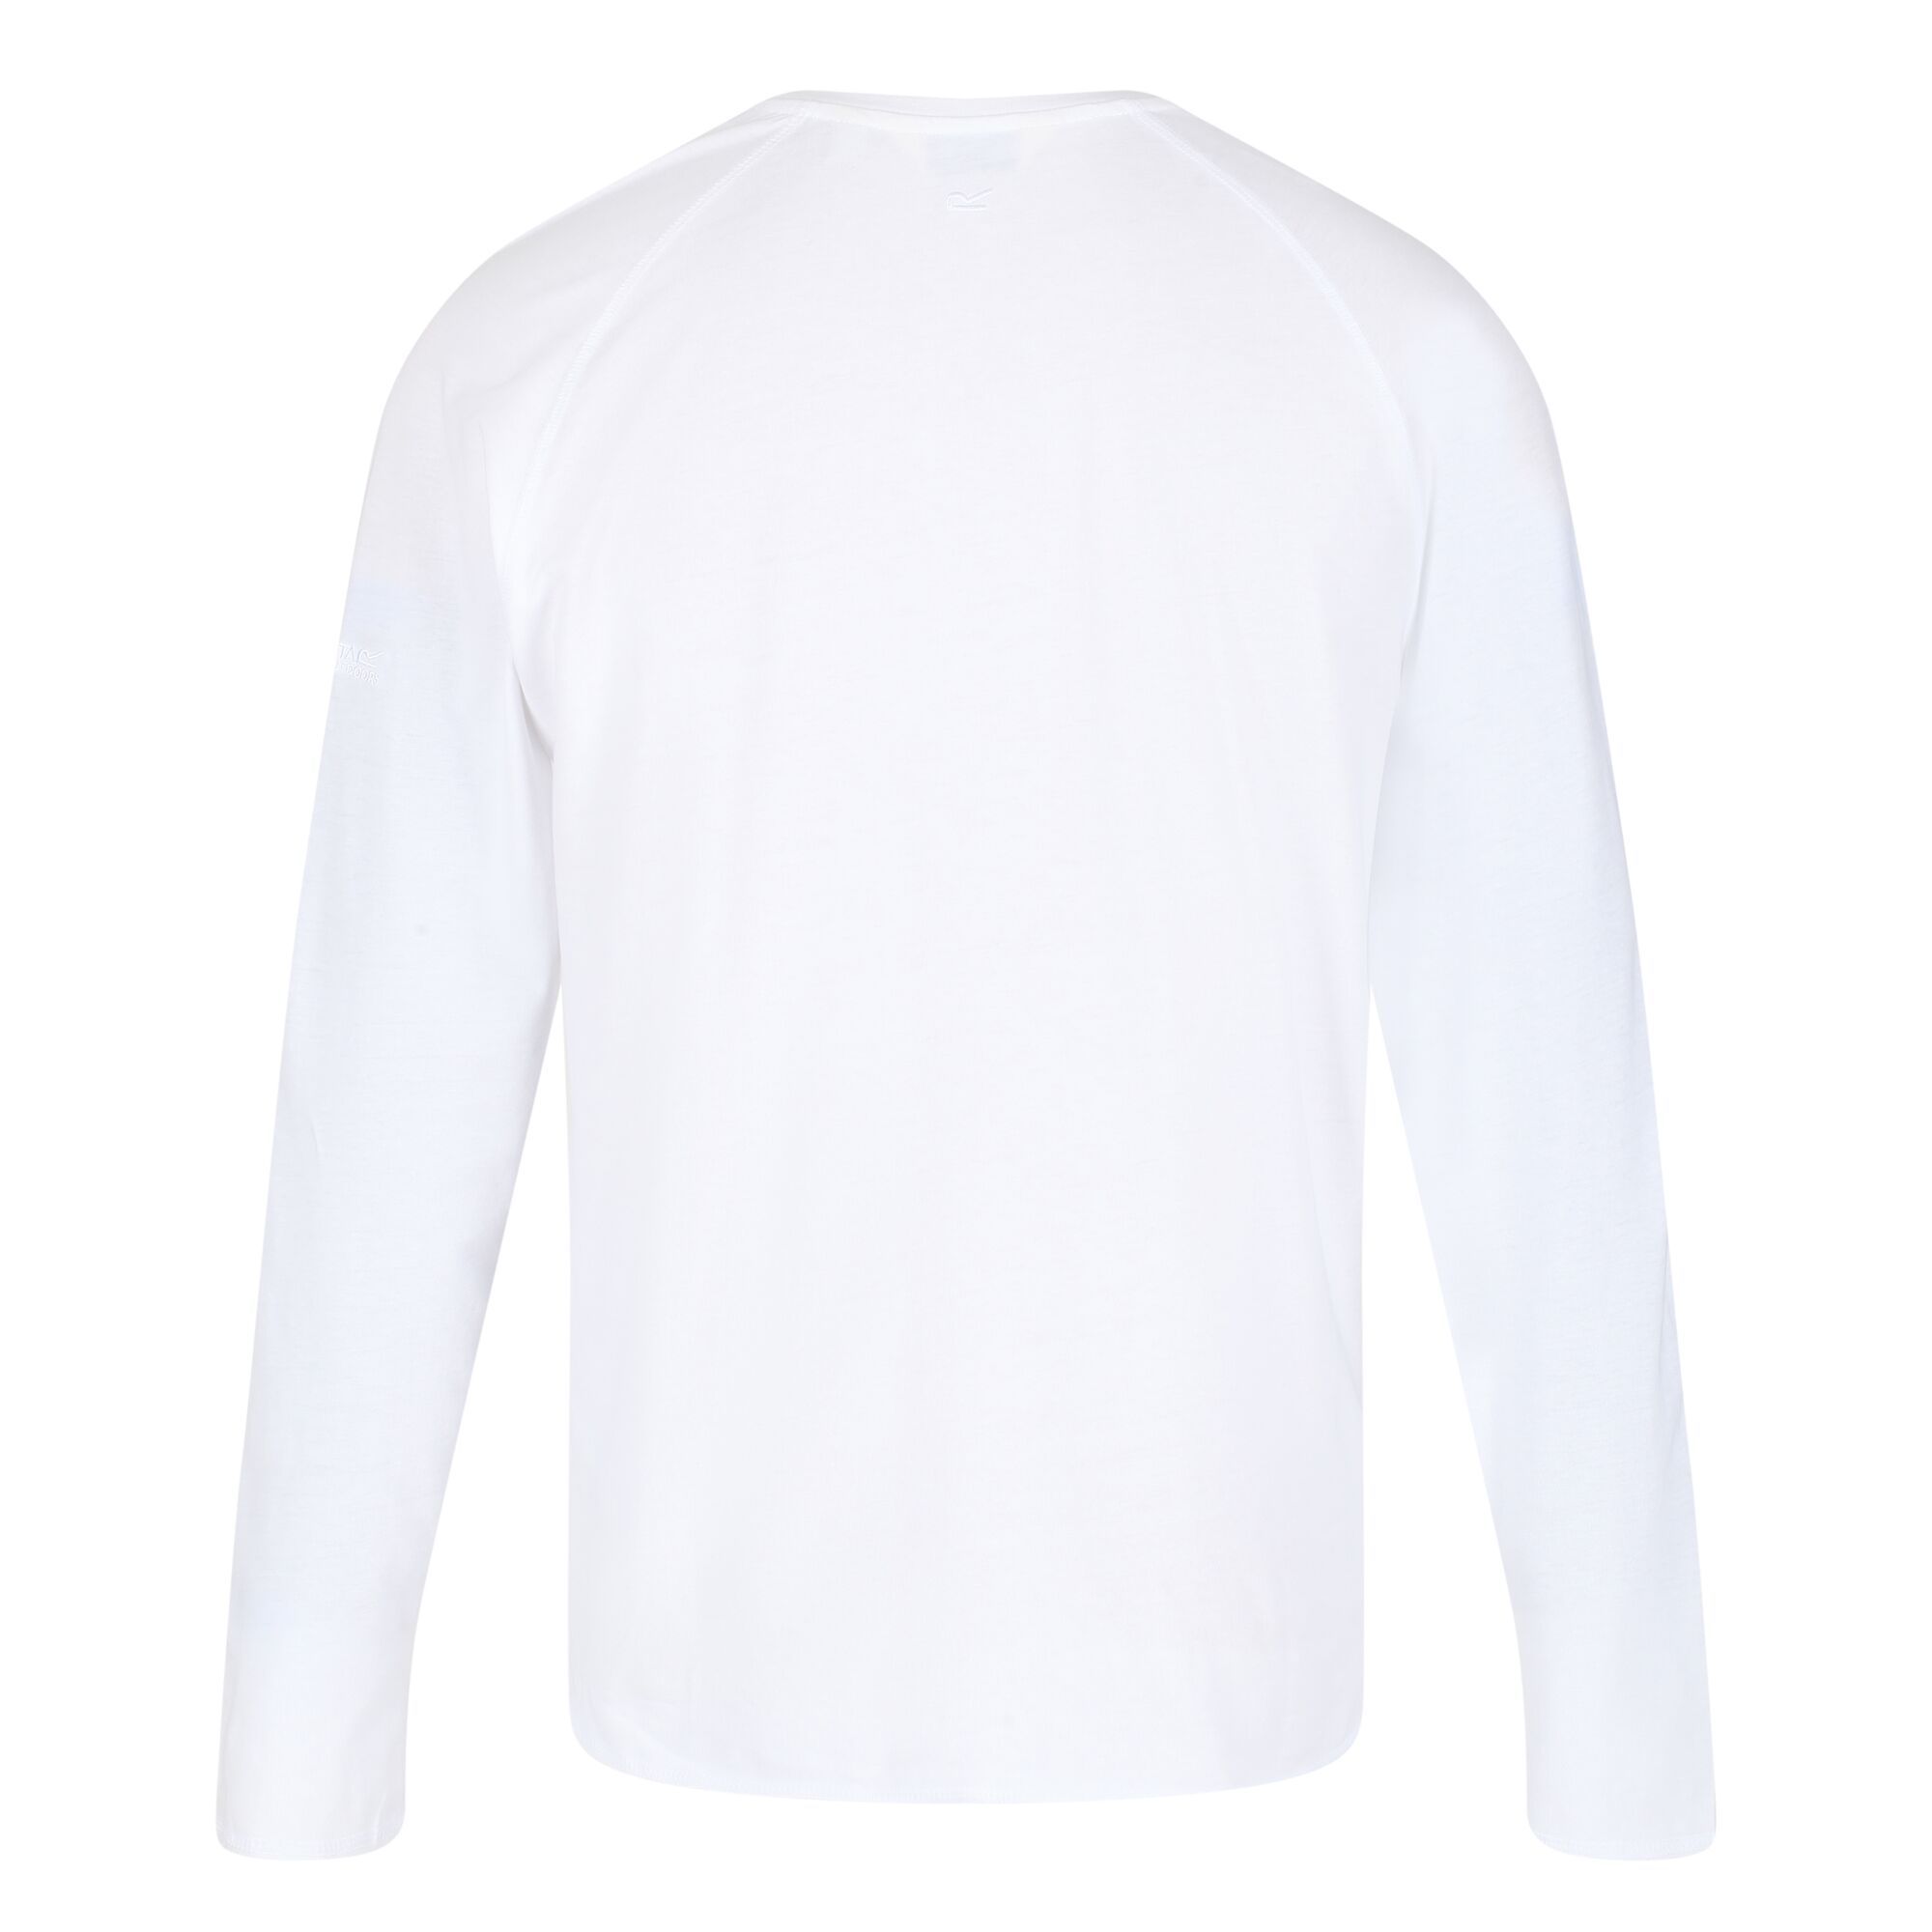 Material: 60% Cotton, 40% Polyester. Long sleeved sweatshirt with v-neckline. Made from 160gsm Coolweave organic cotton/polyester single jersey fabric. Garment enzyme washed for softer handle.